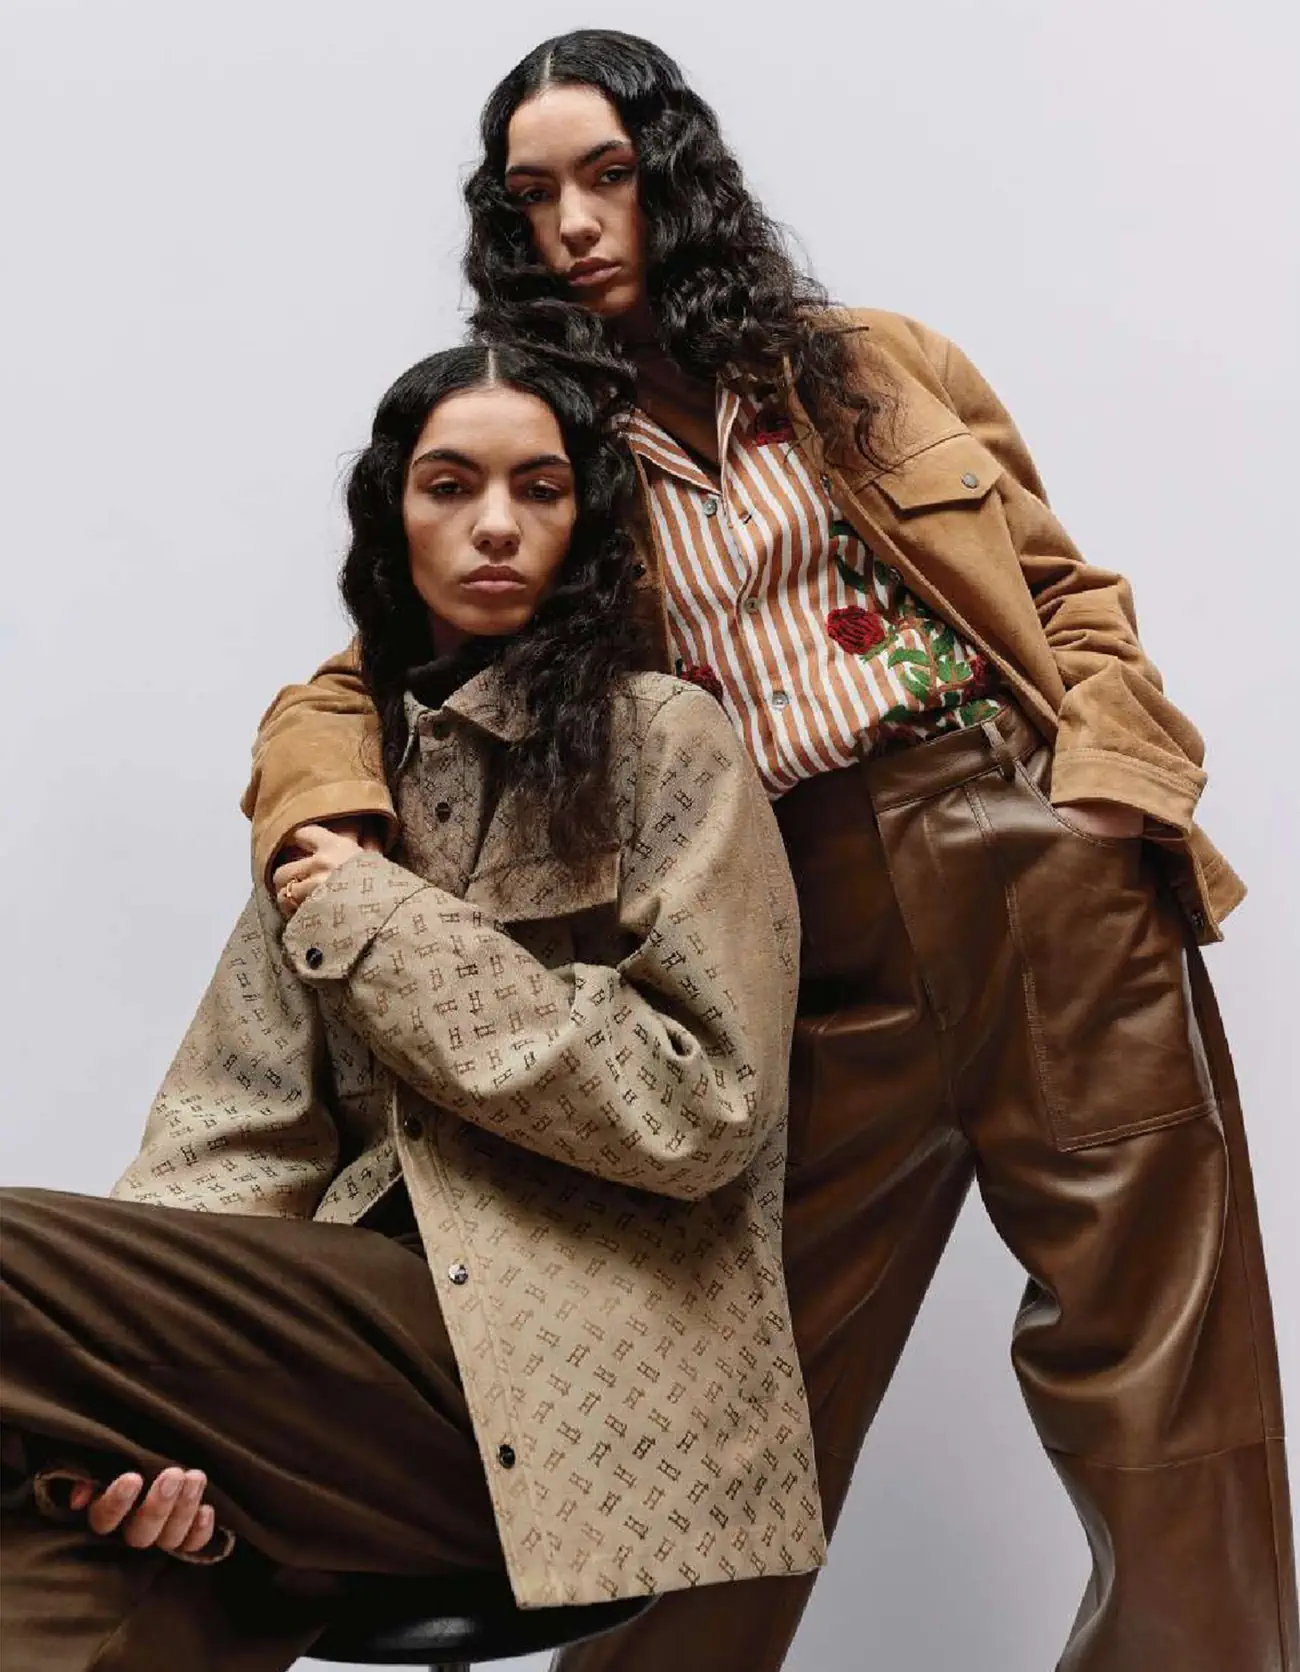 Sadhbh and Cadhla O’Reilly by Ekua King for Elle France April 13th, 2023